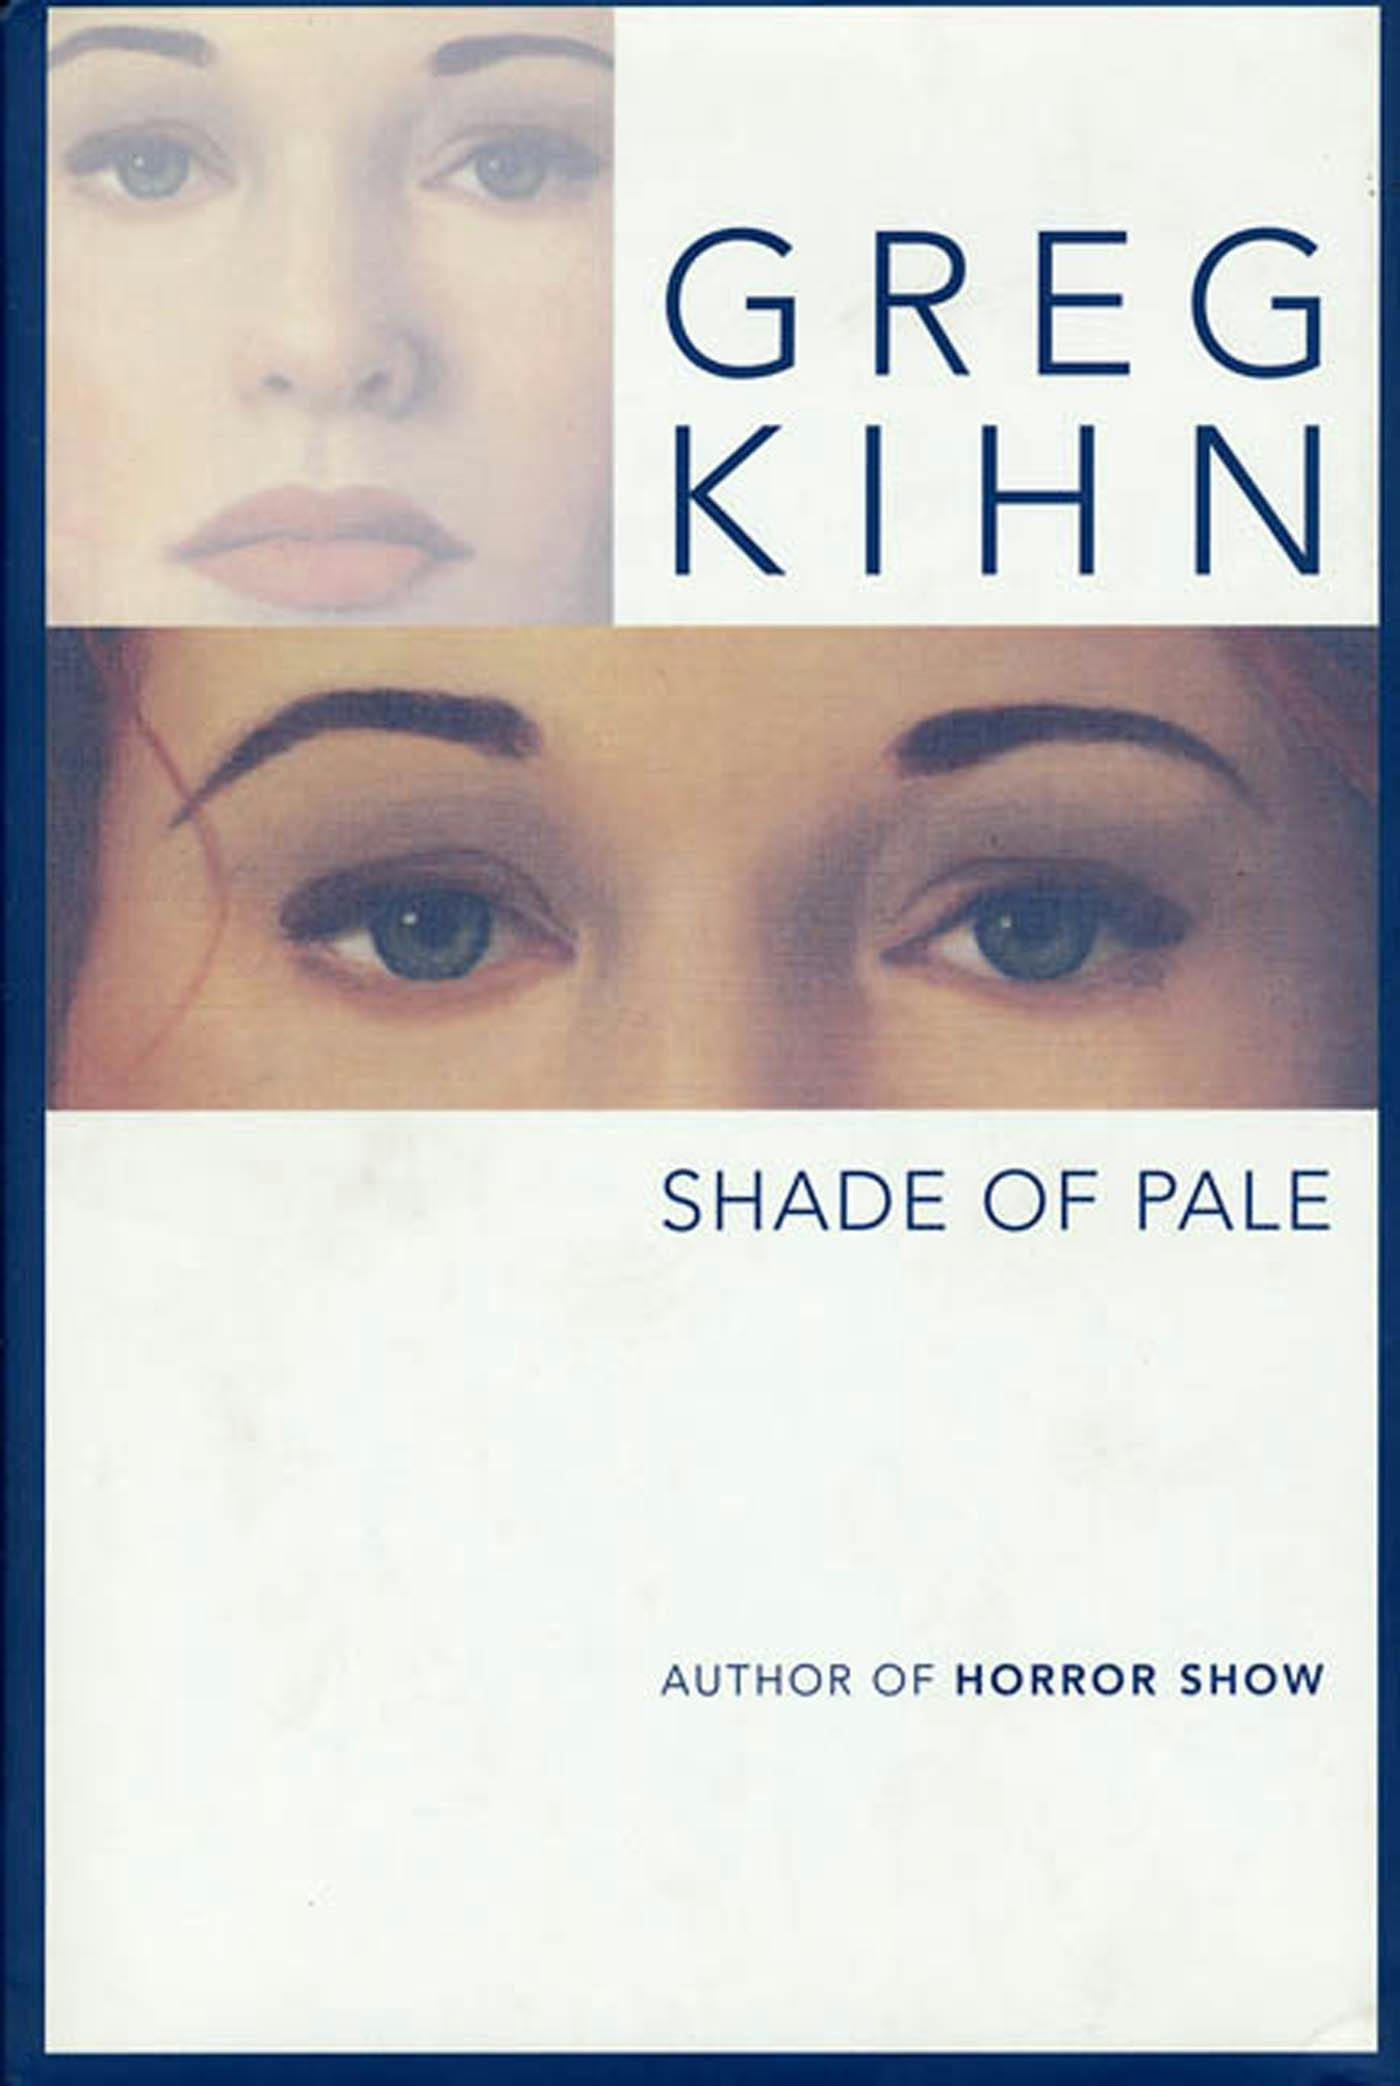 Cover for the book titled as: Shade of Pale